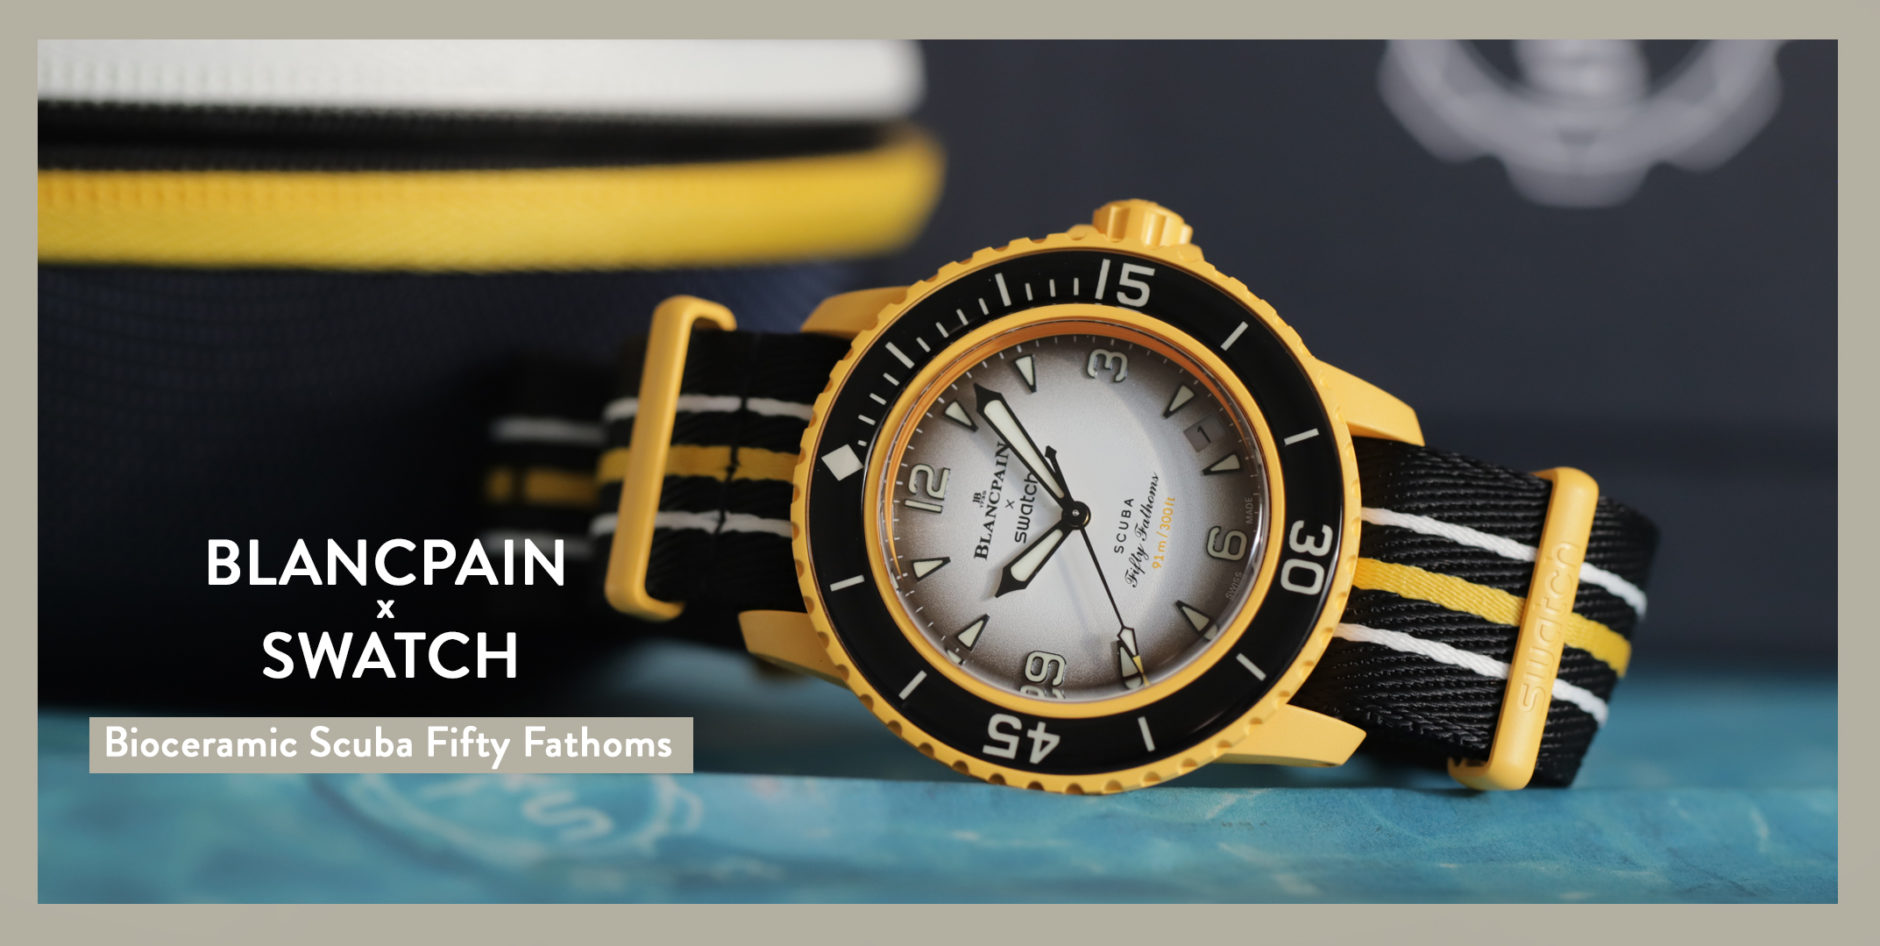 Pacific Ocean Edition from Blancpain and Swatch